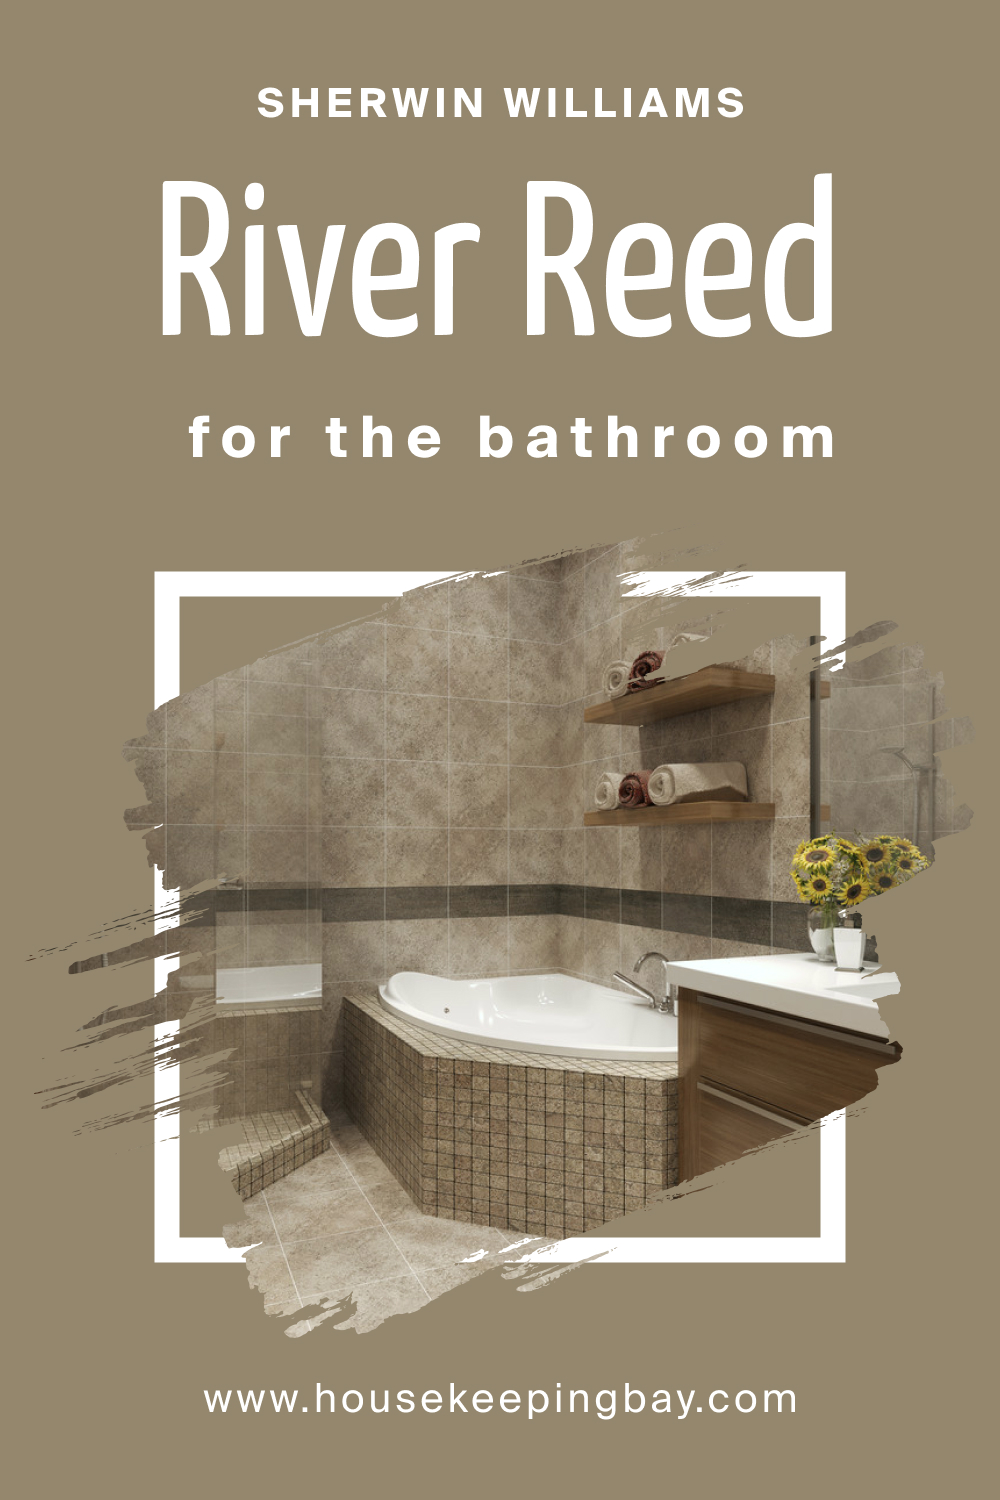 Sherwin Williams. SW 9534 River Reed For the Bathroom